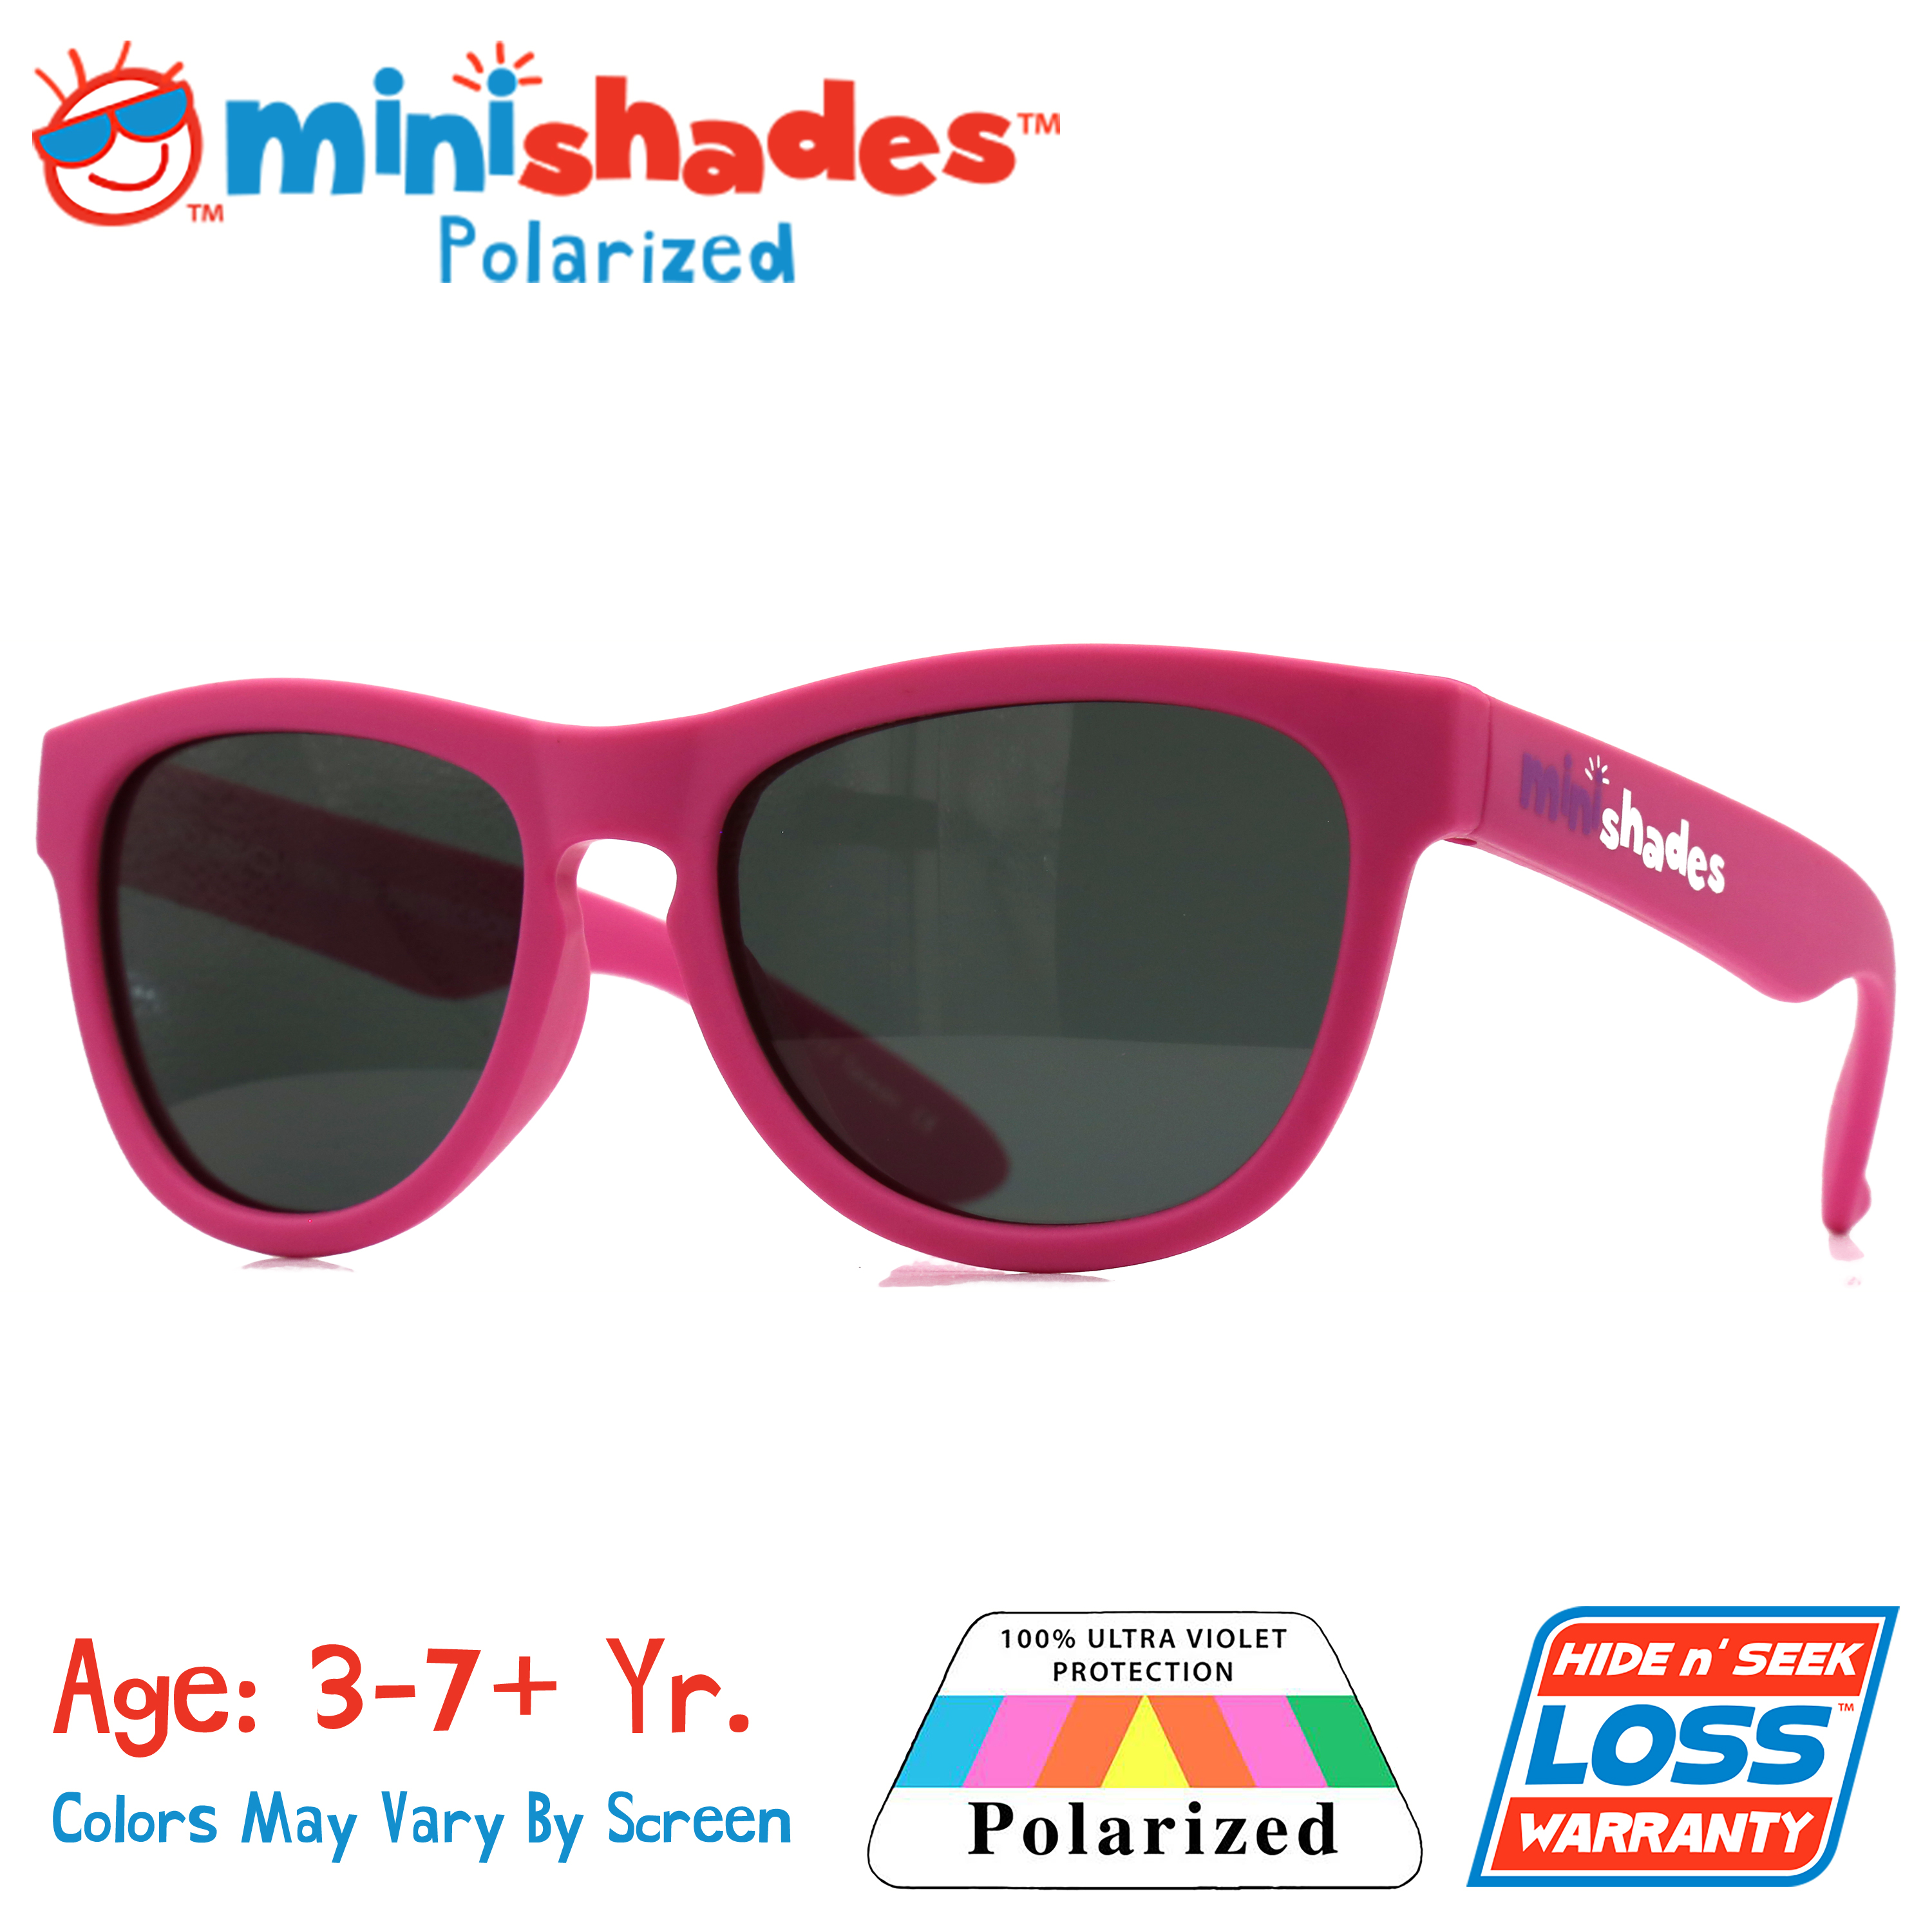 Minishades Polarized: Flexible Kids Sunglasses - Hot Pink |UVA/UVB| Hide n' Seek Replacement | Age: 3-7+Yr. - image 1 of 4